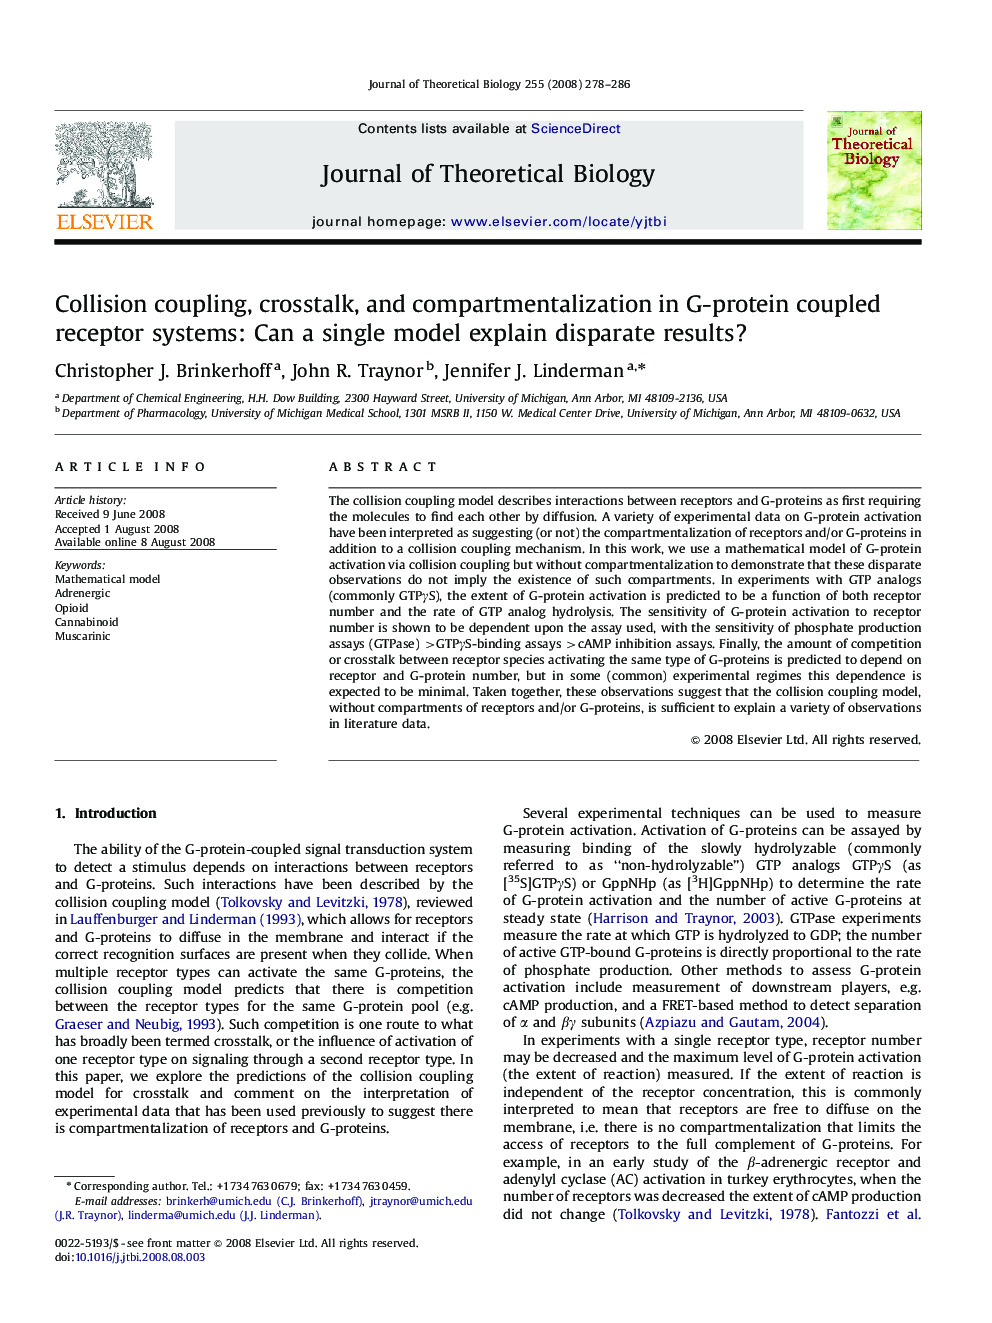 Collision coupling, crosstalk, and compartmentalization in G-protein coupled receptor systems: Can a single model explain disparate results?